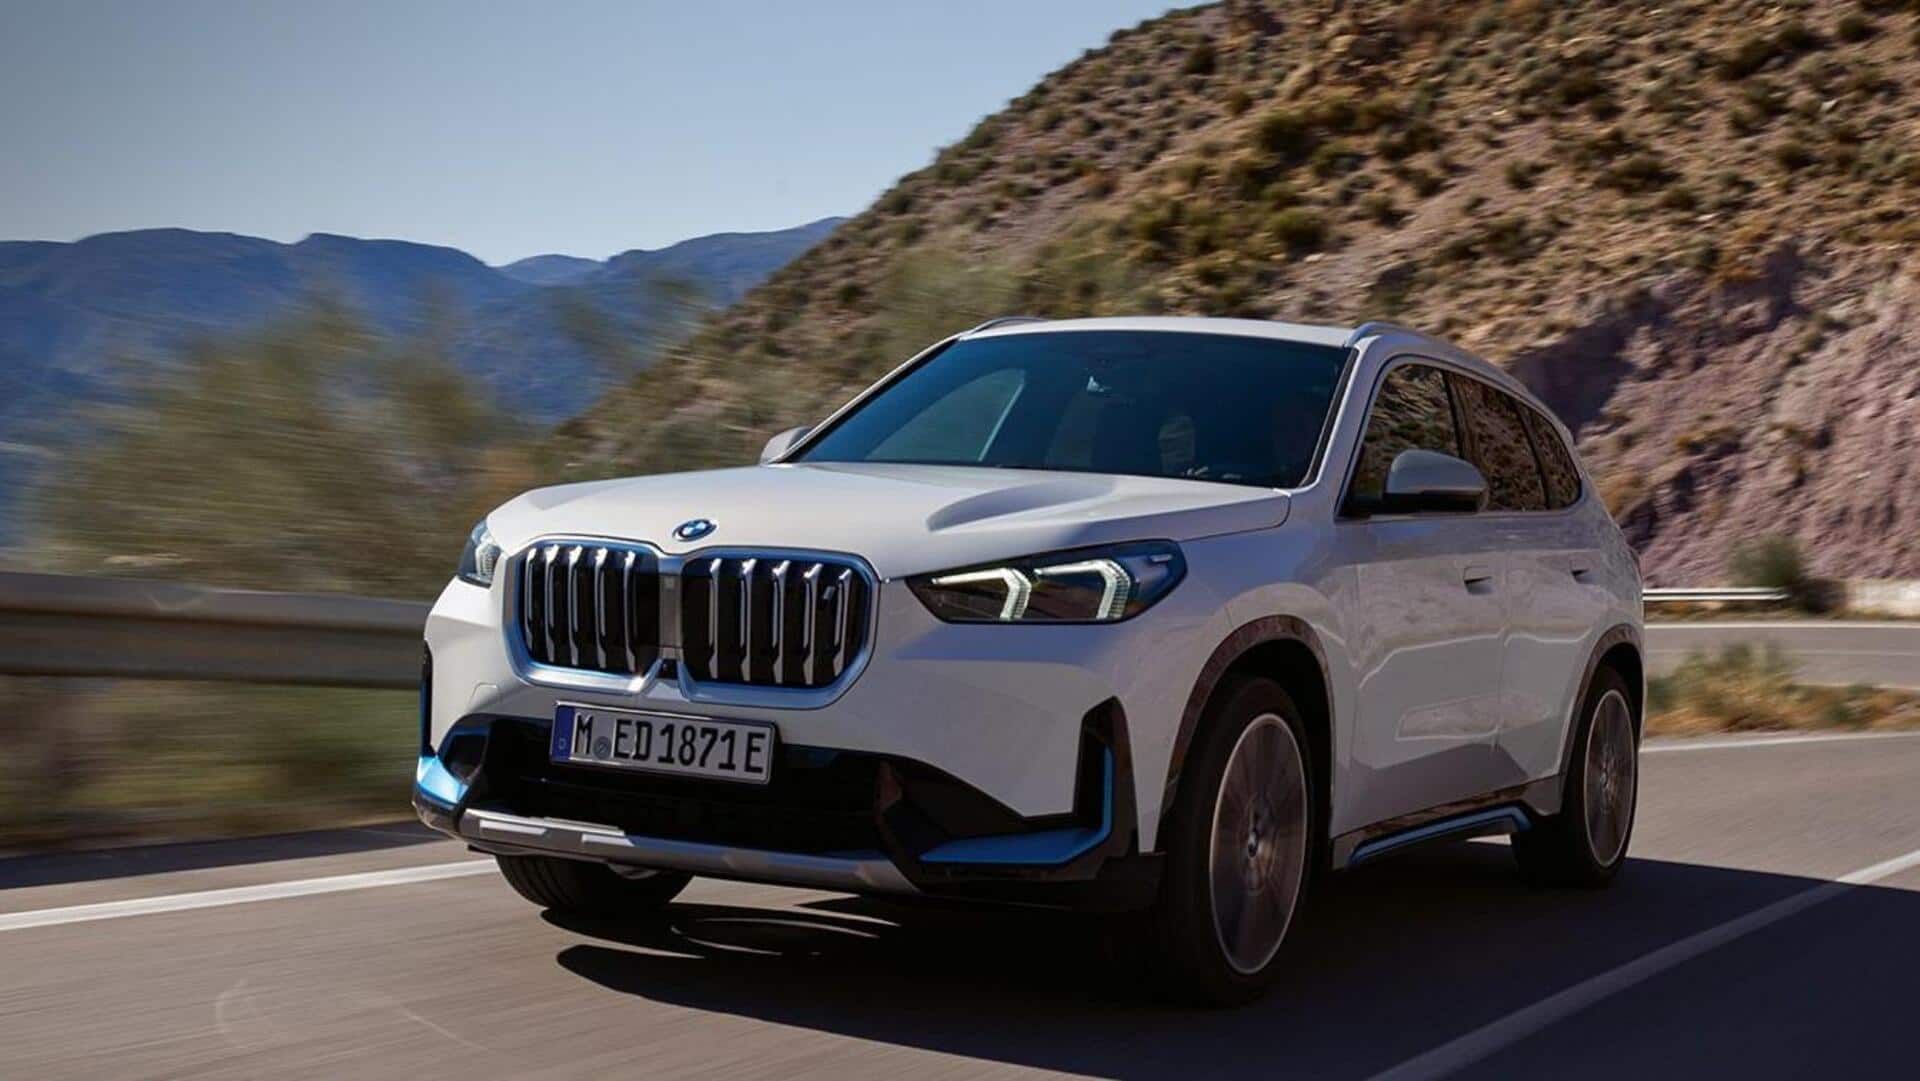 Prior to launch in India, BMW iX1 e-SUV teased